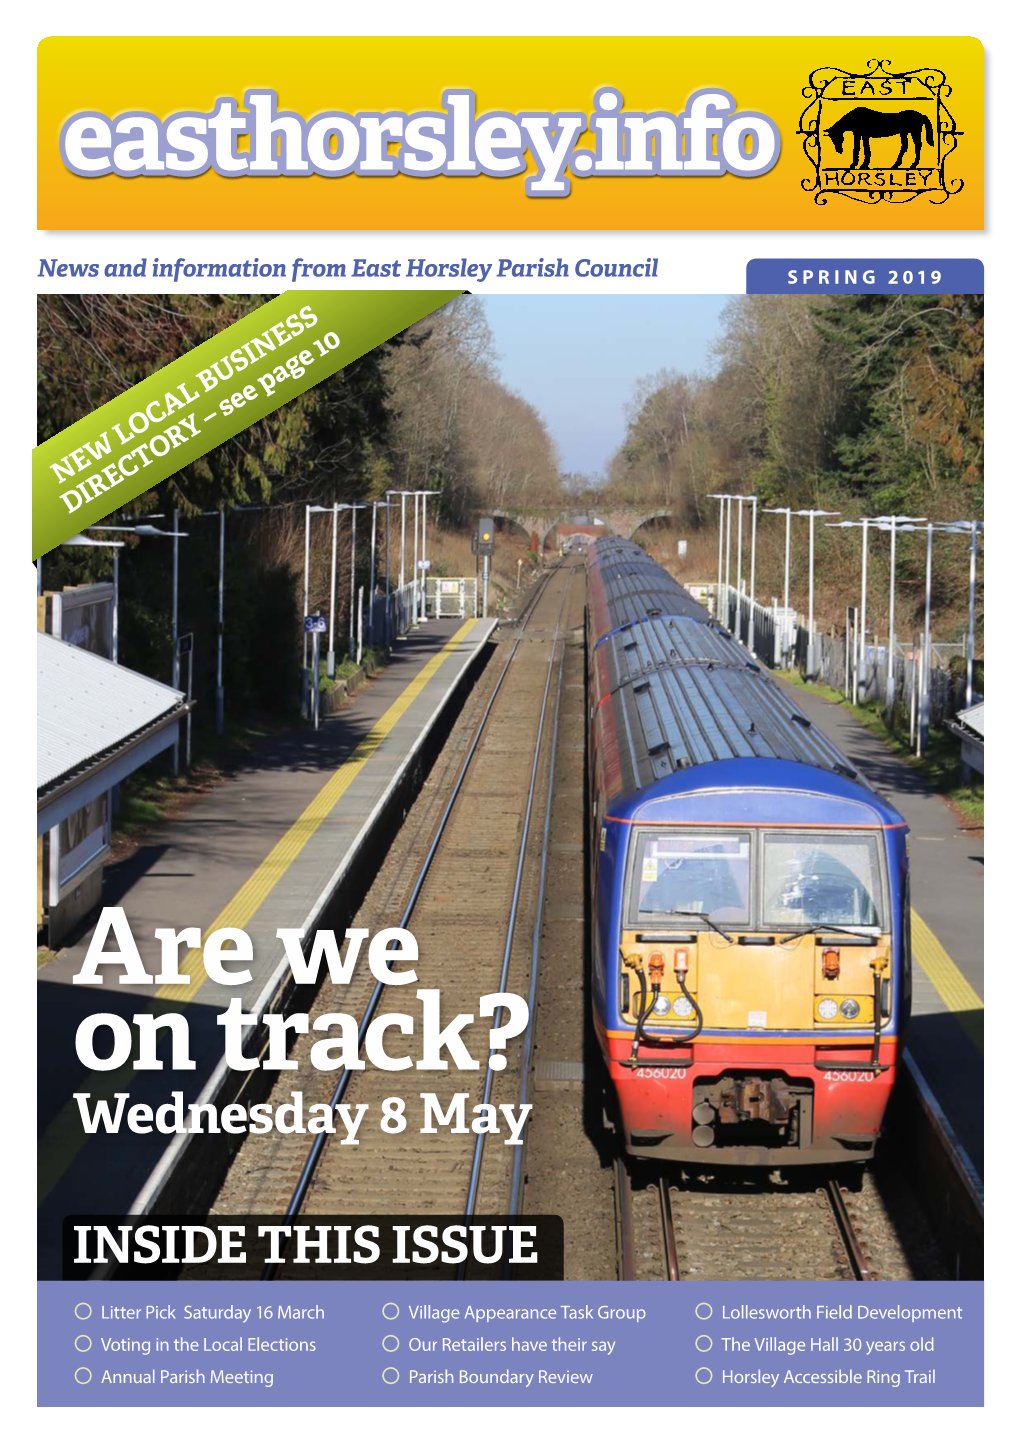 Are We on Track? Wednesday 8 May